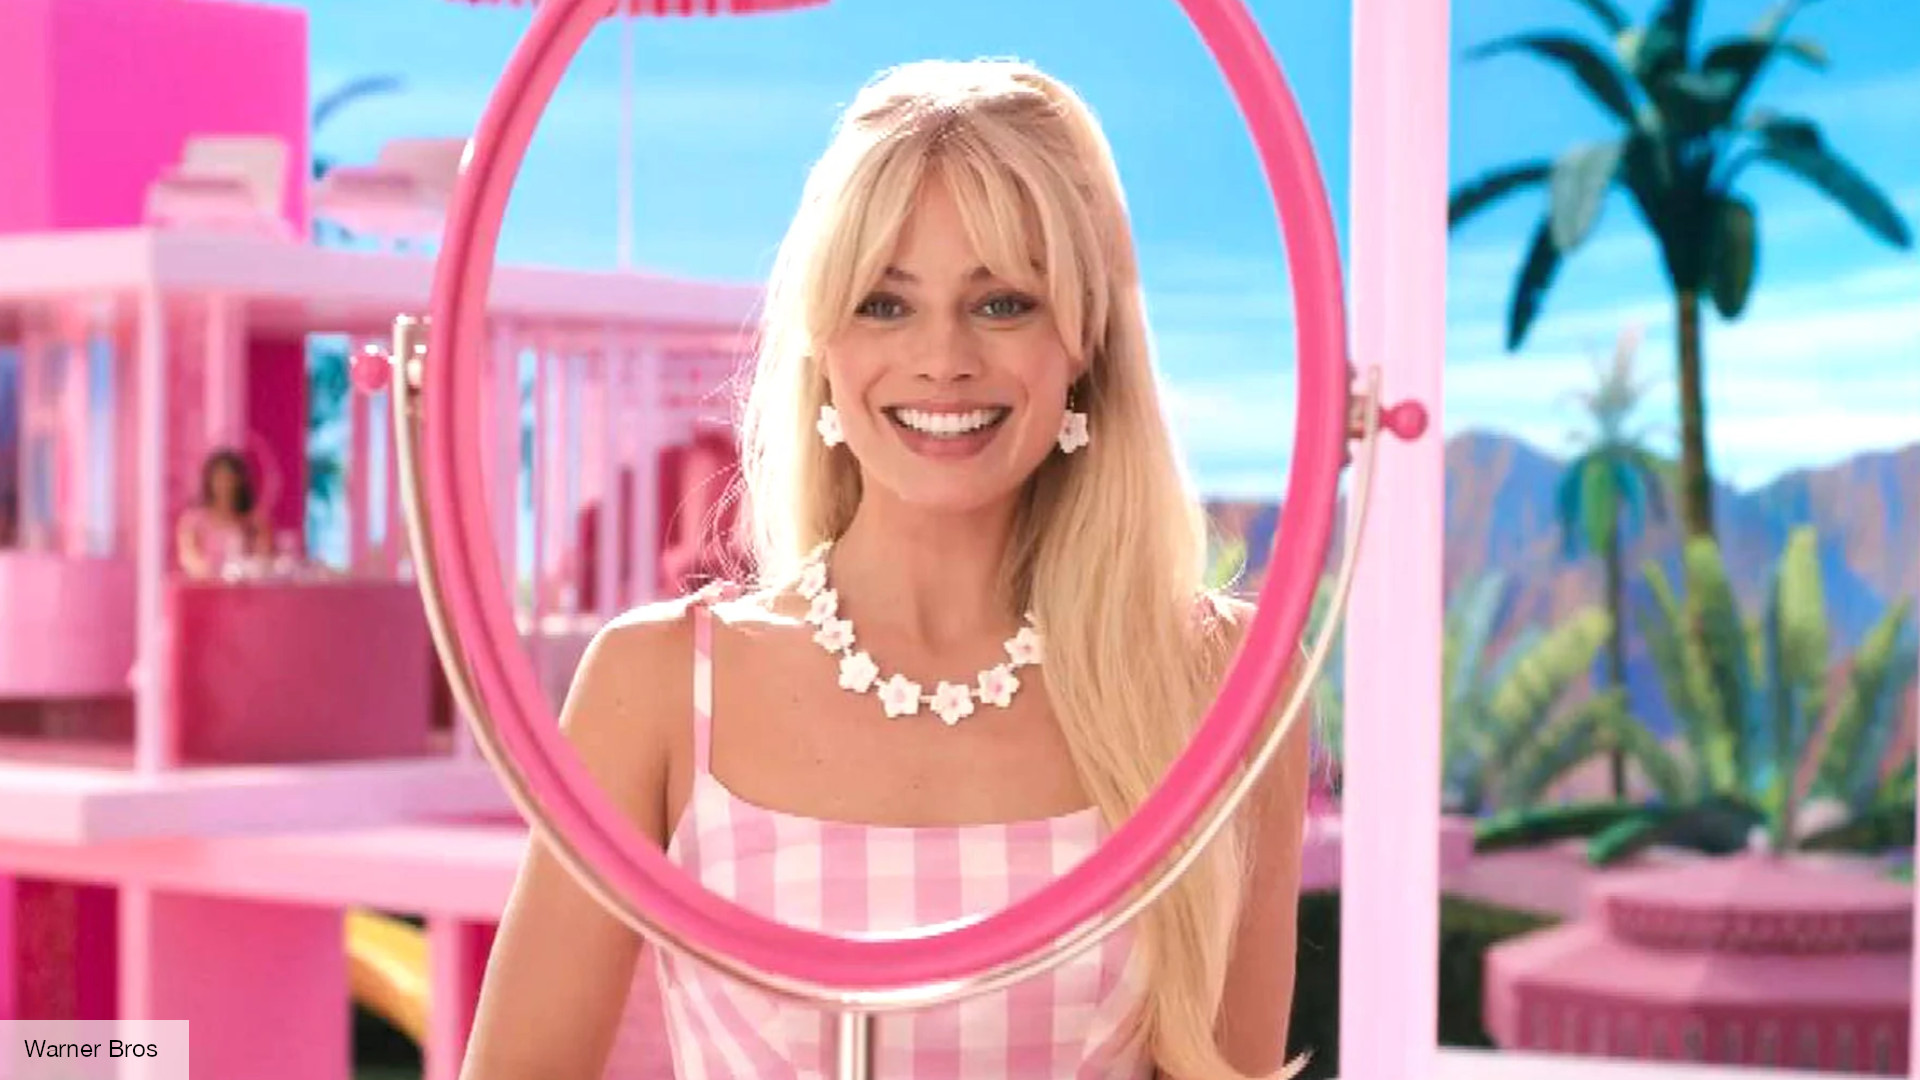 The Barbie movie caused a literal shortage of the color pink. The Digital Fix